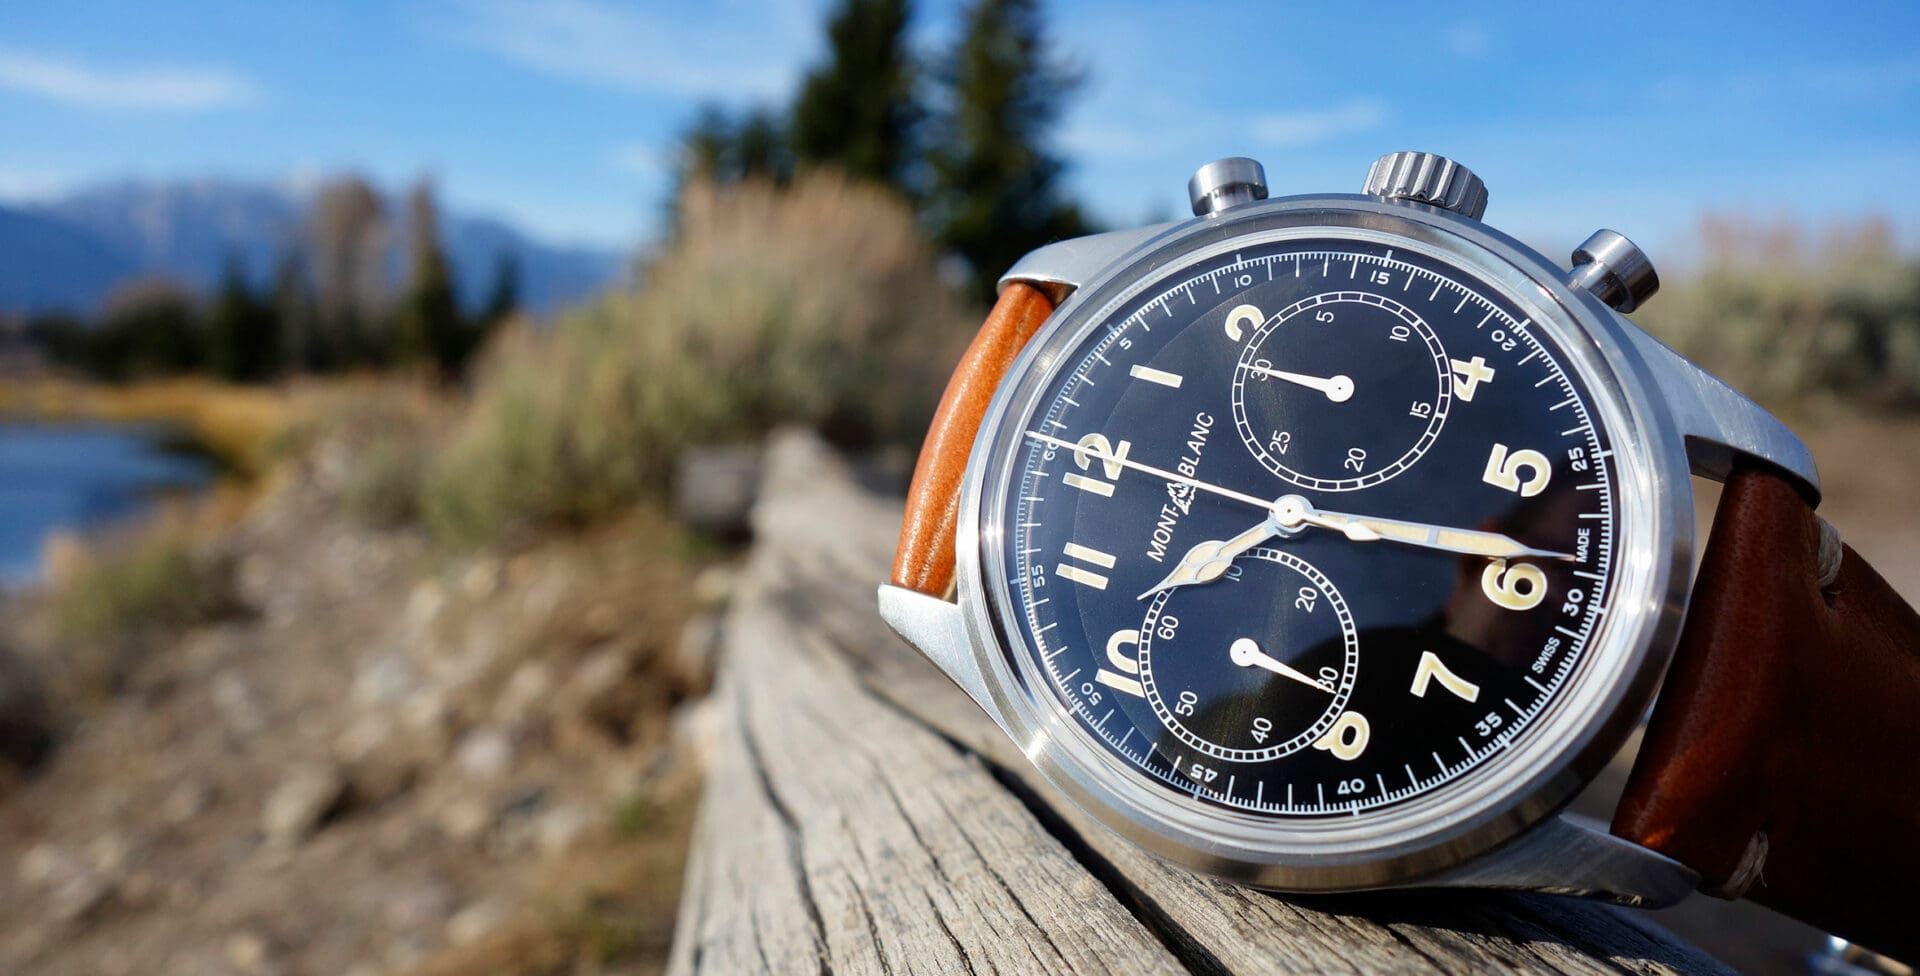 HANDS-ON: The Montblanc 1858 Chronograph